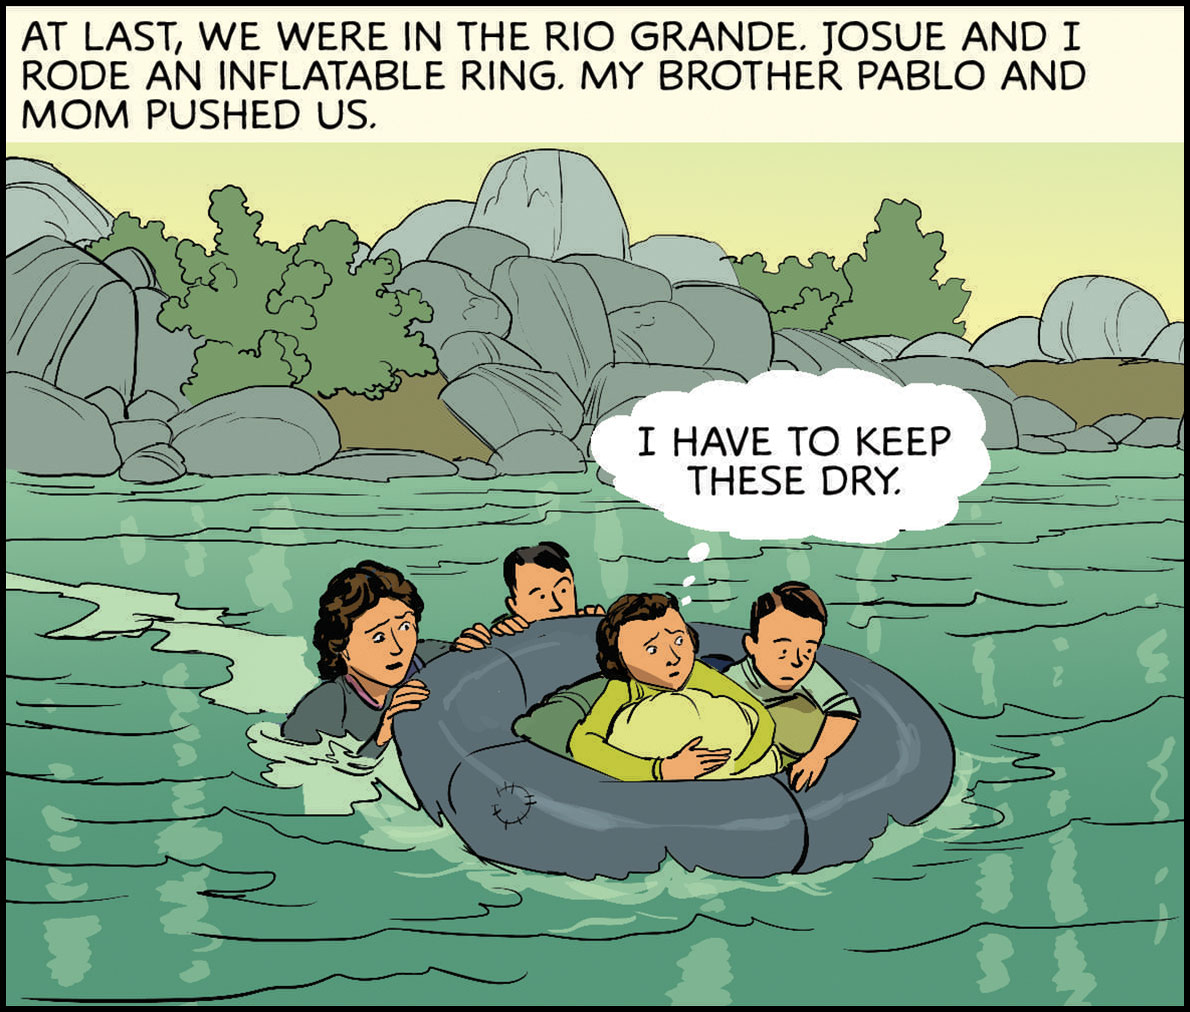 At last, we were in the Rio Grande. Josue and I rode an inflatable ring. Pablo and mom pushed us. Katherine (with a bag of clothes and shoes) thought bubble : “I have to keep these dry.” 